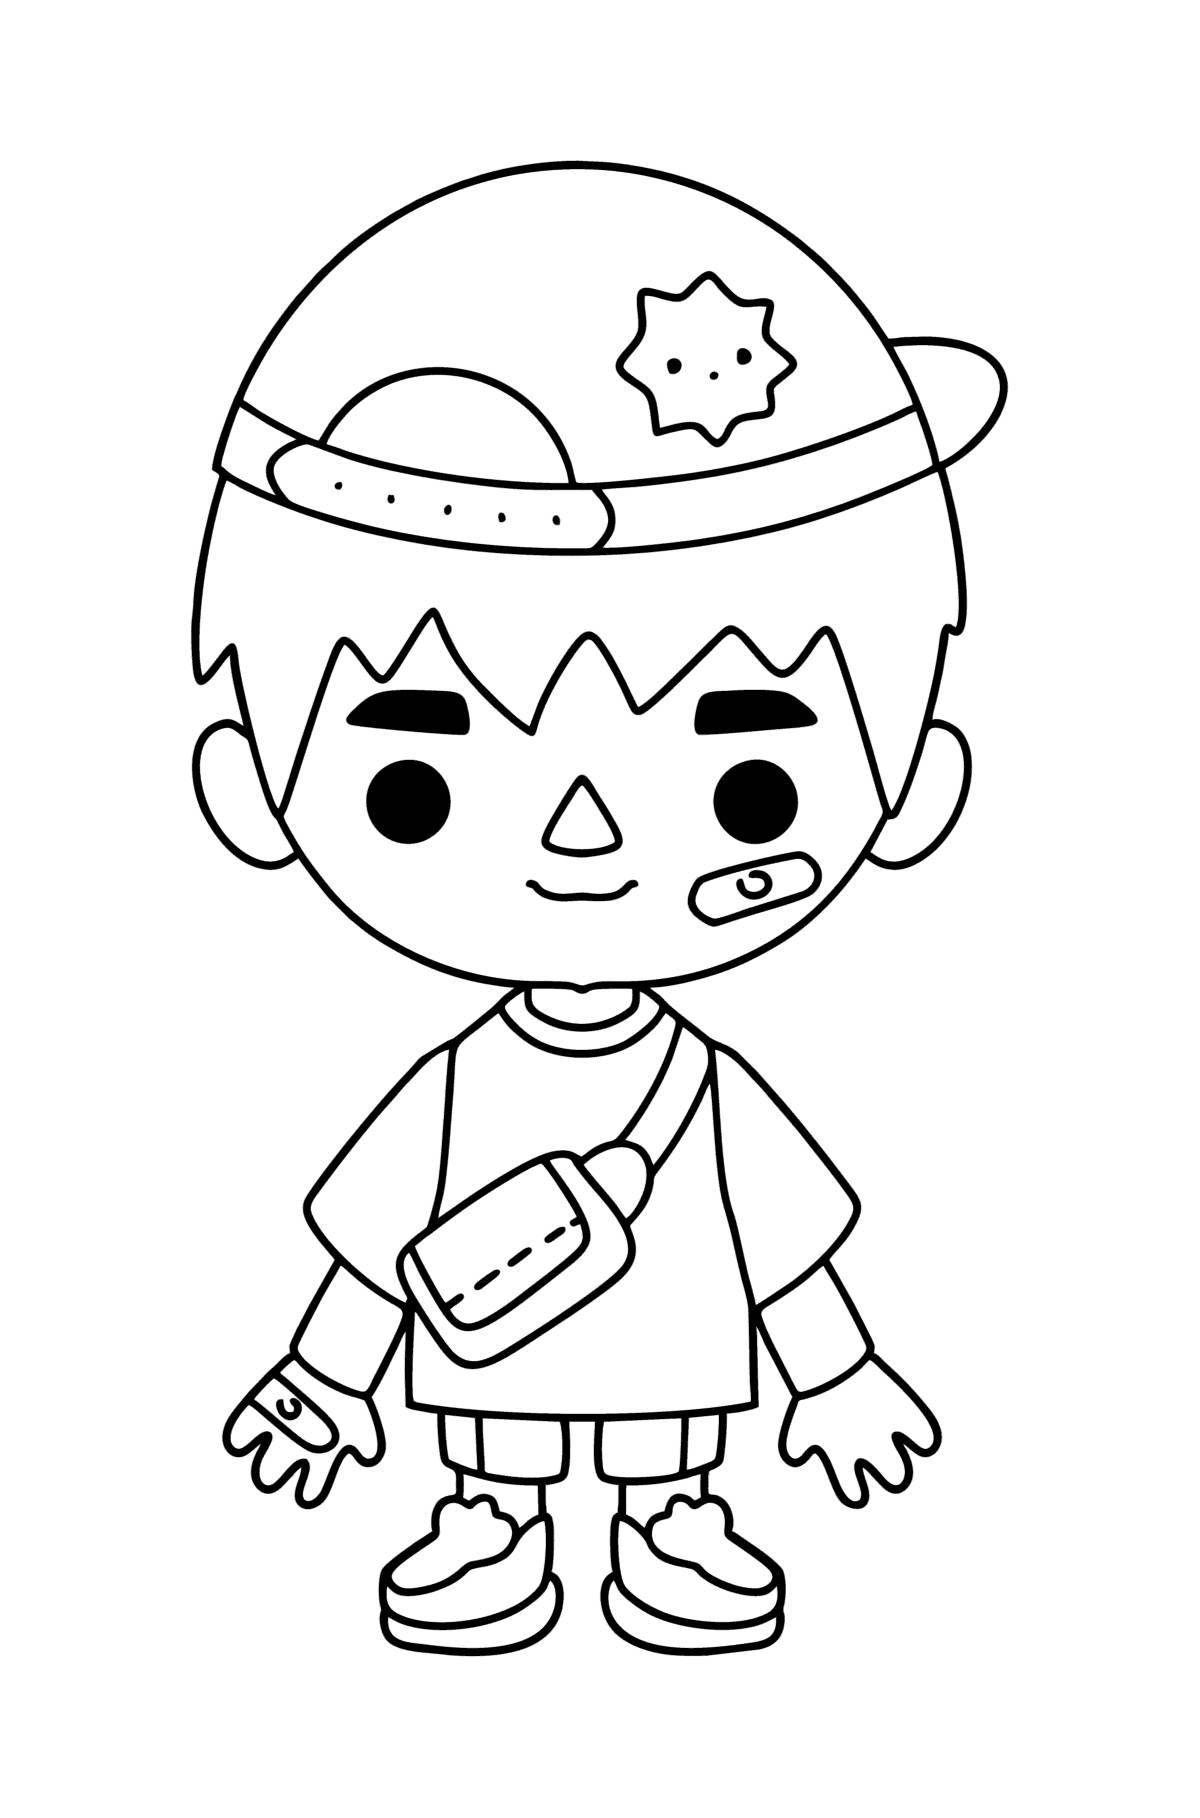 Boca boys coloring pages in vibrant colors